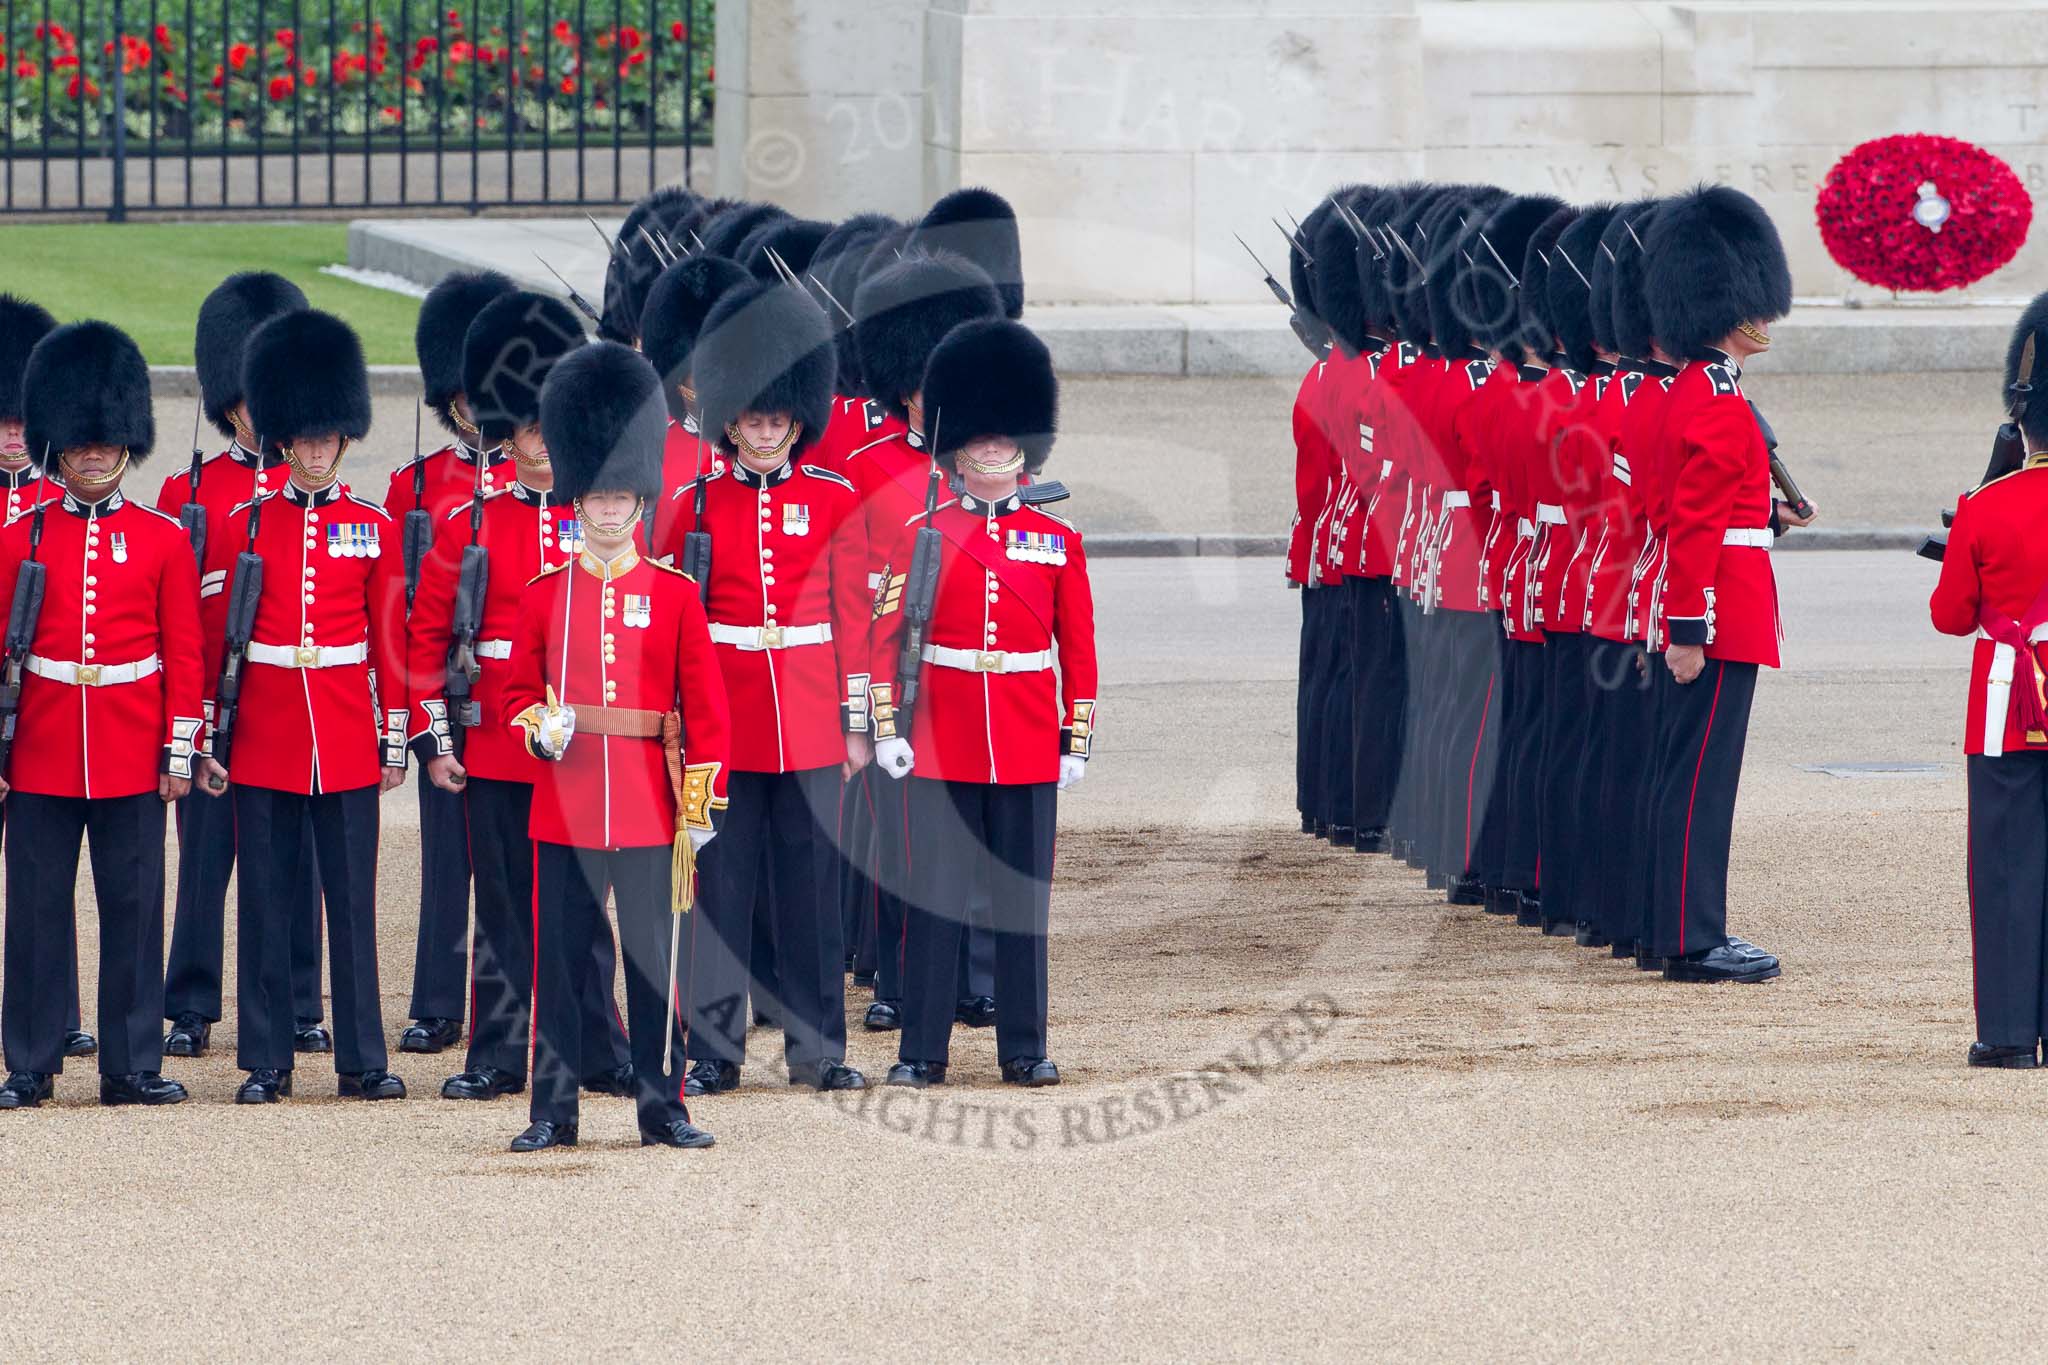 Trooping the Colour 2011: No. 3 Guard, F Company Scots Guards, opening up a gap in the row of guards for the Royal Procession. In the background is the Guards Memorial..
Horse Guards Parade, Westminster,
London SW1,
Greater London,
United Kingdom,
on 11 June 2011 at 10:45, image #77